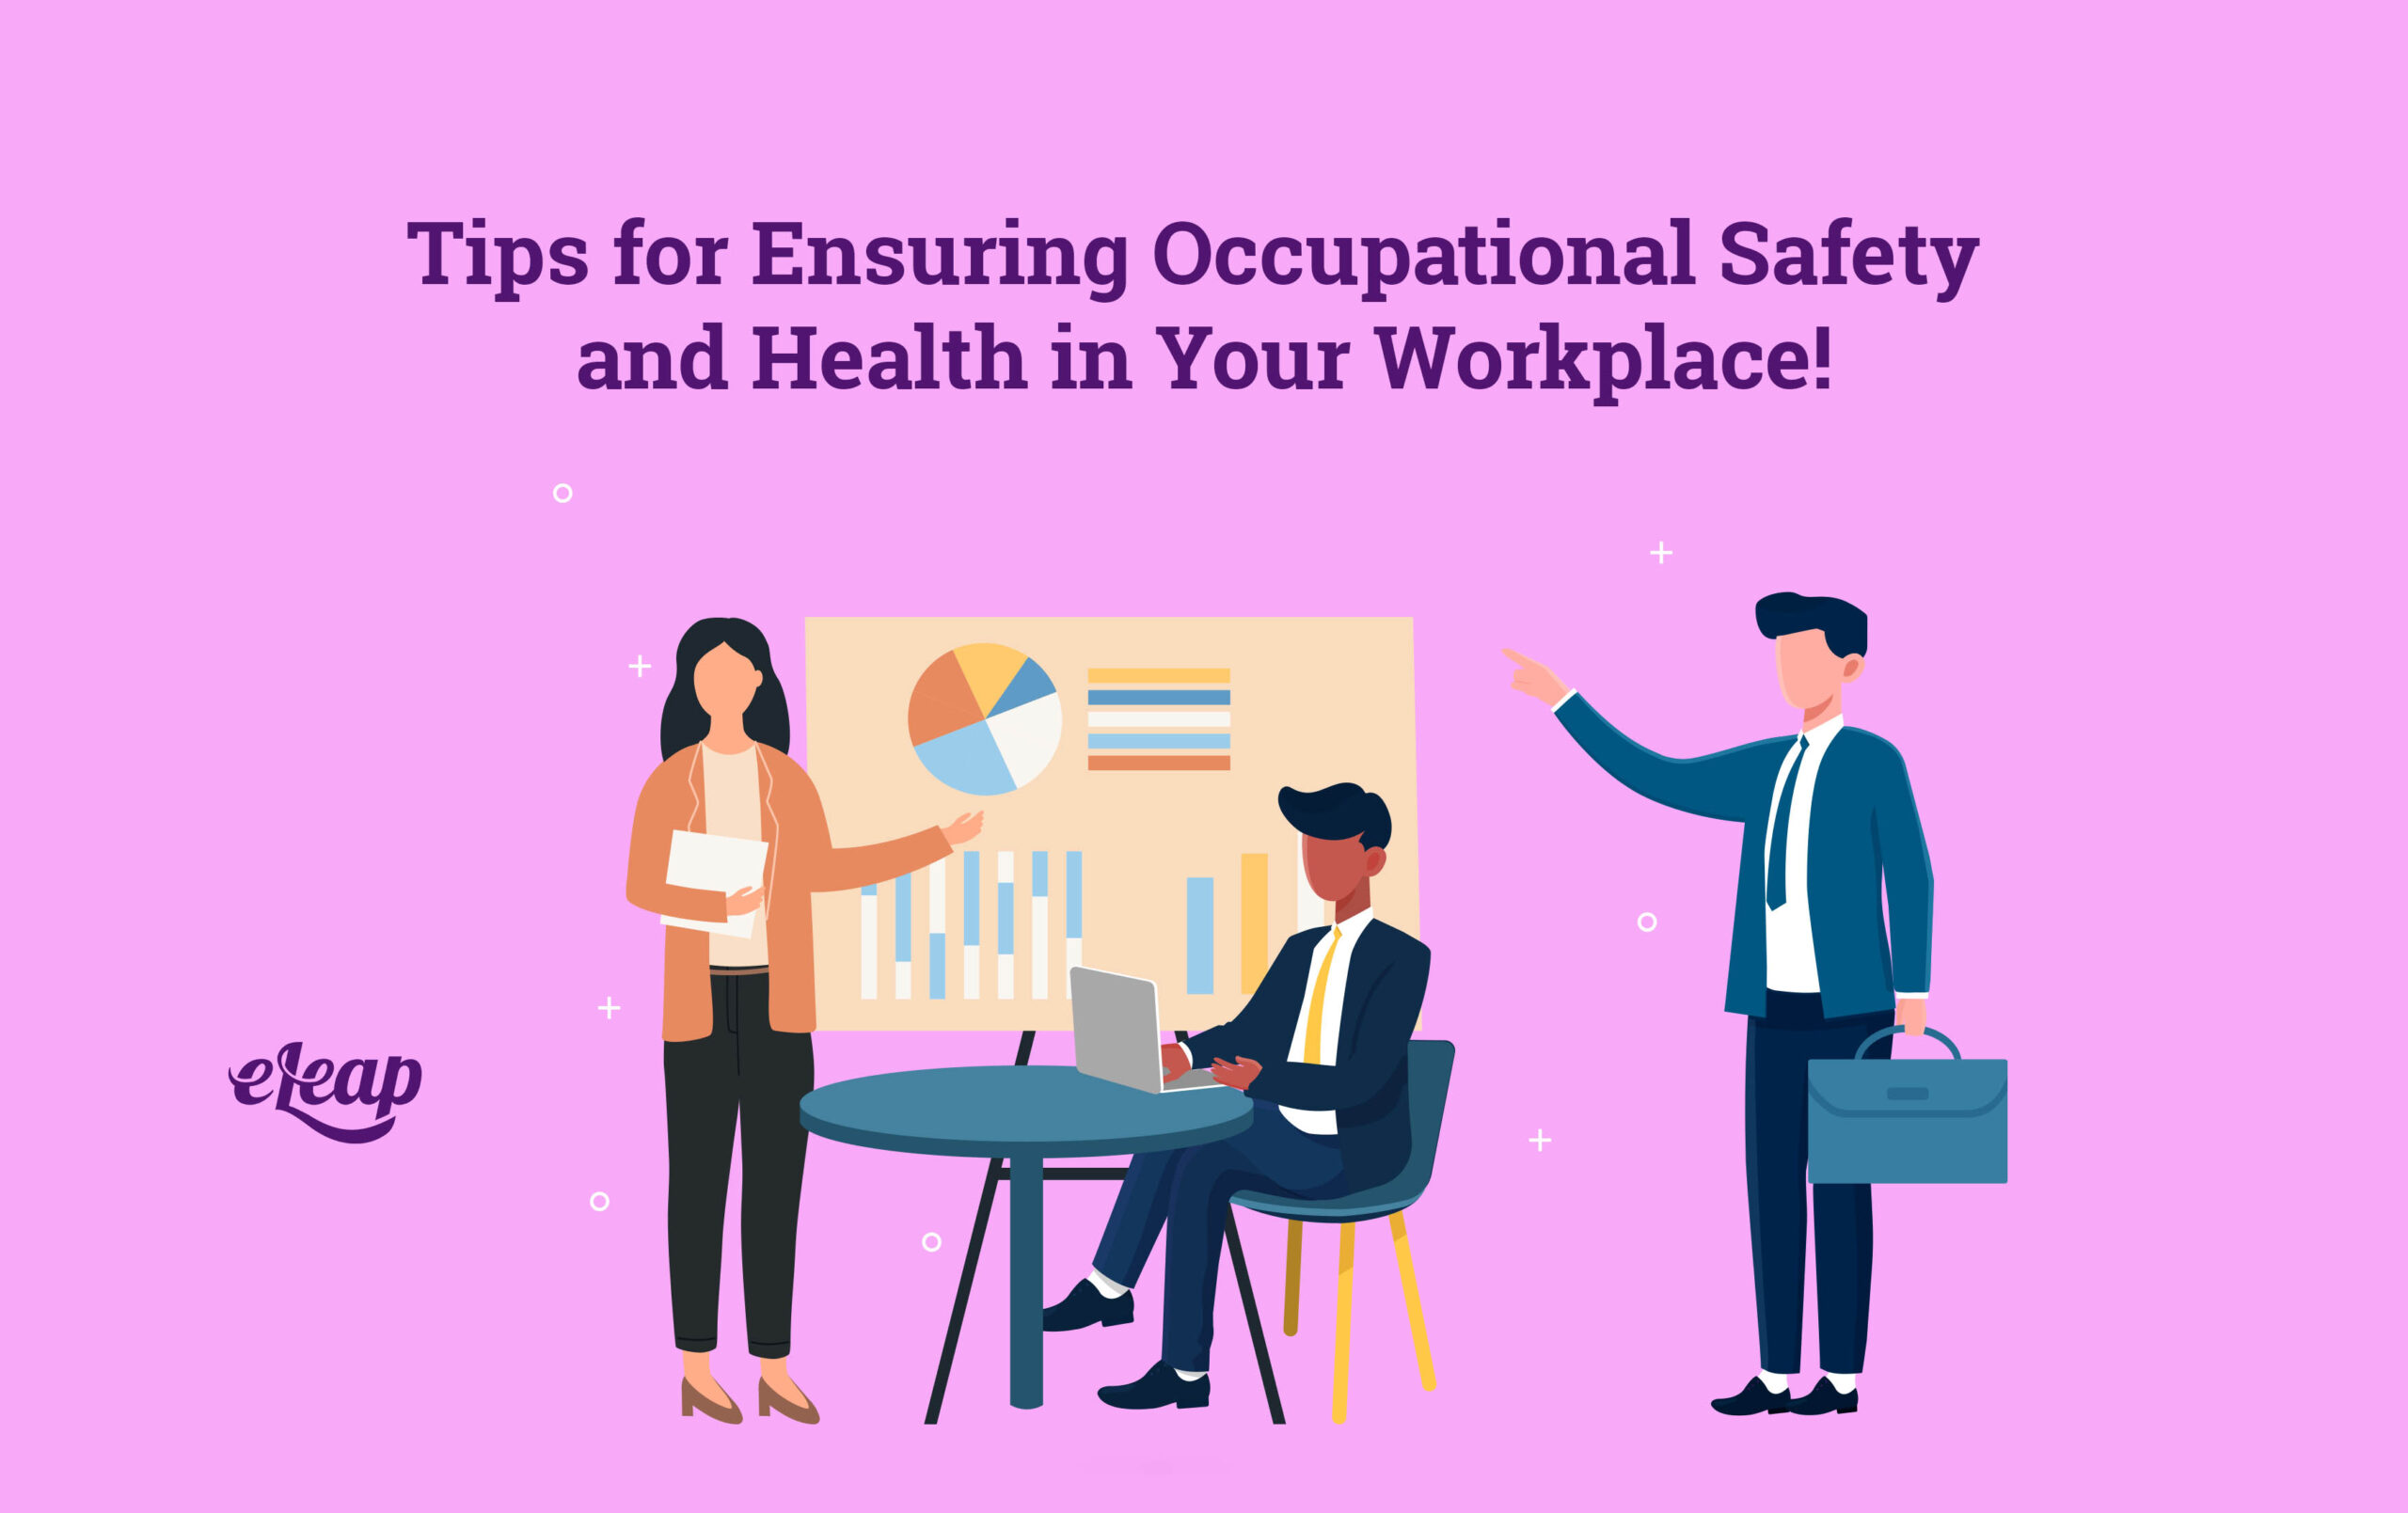 Tips for Ensuring Occupational Safety and Health in Your Workplace! - eLeaP